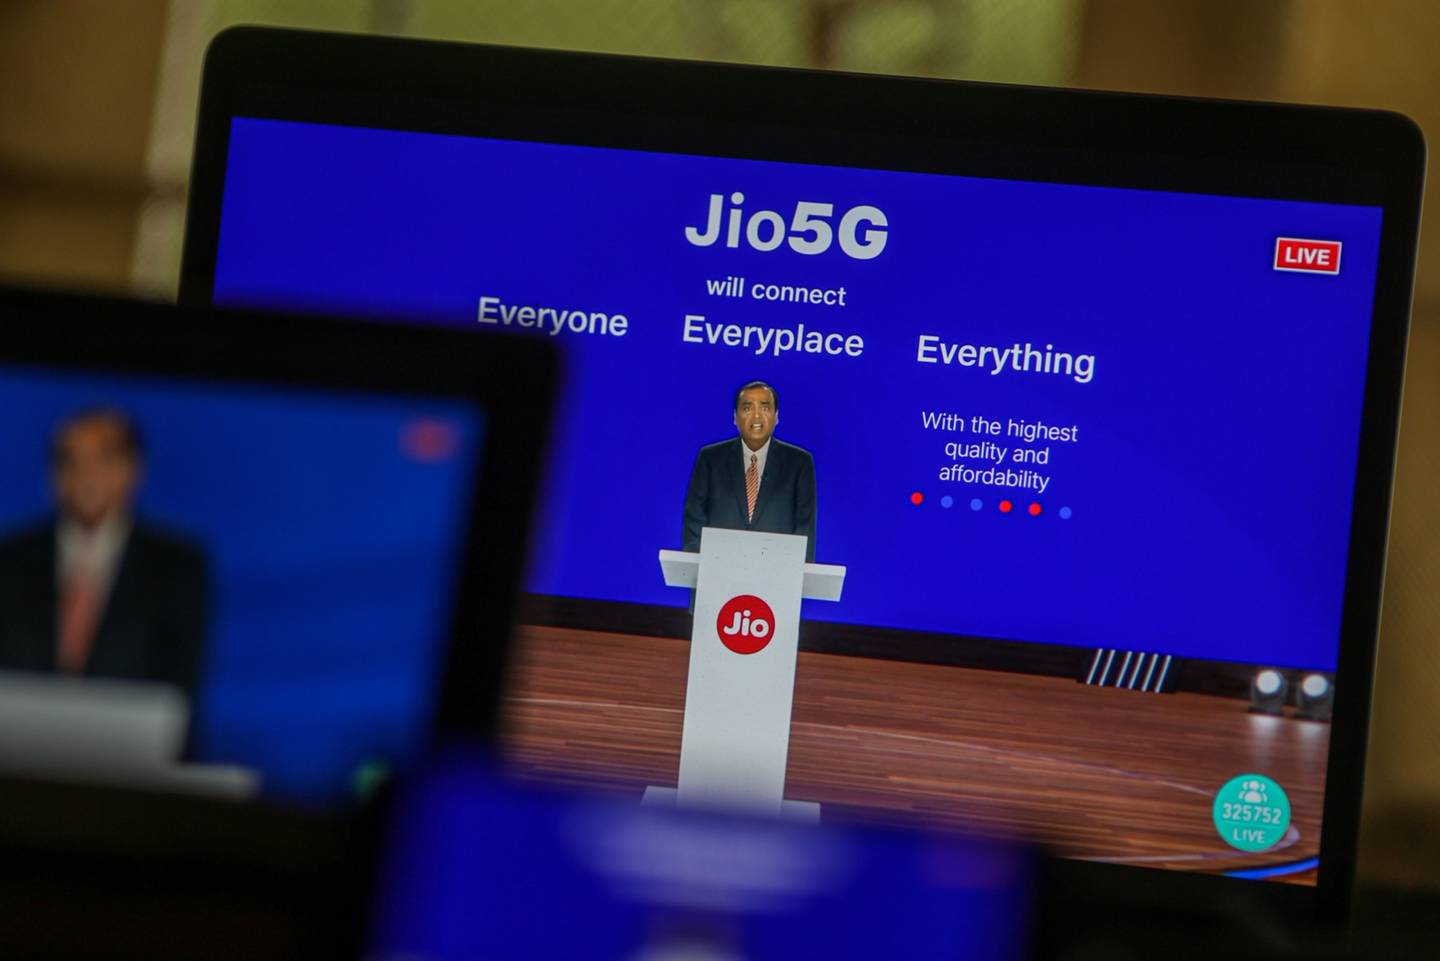 Mukesh Ambani, chairman and managing director of Reliance Industries, speaks via live stream during the company's annual general meeting last month in Mumbai. Bloomberg